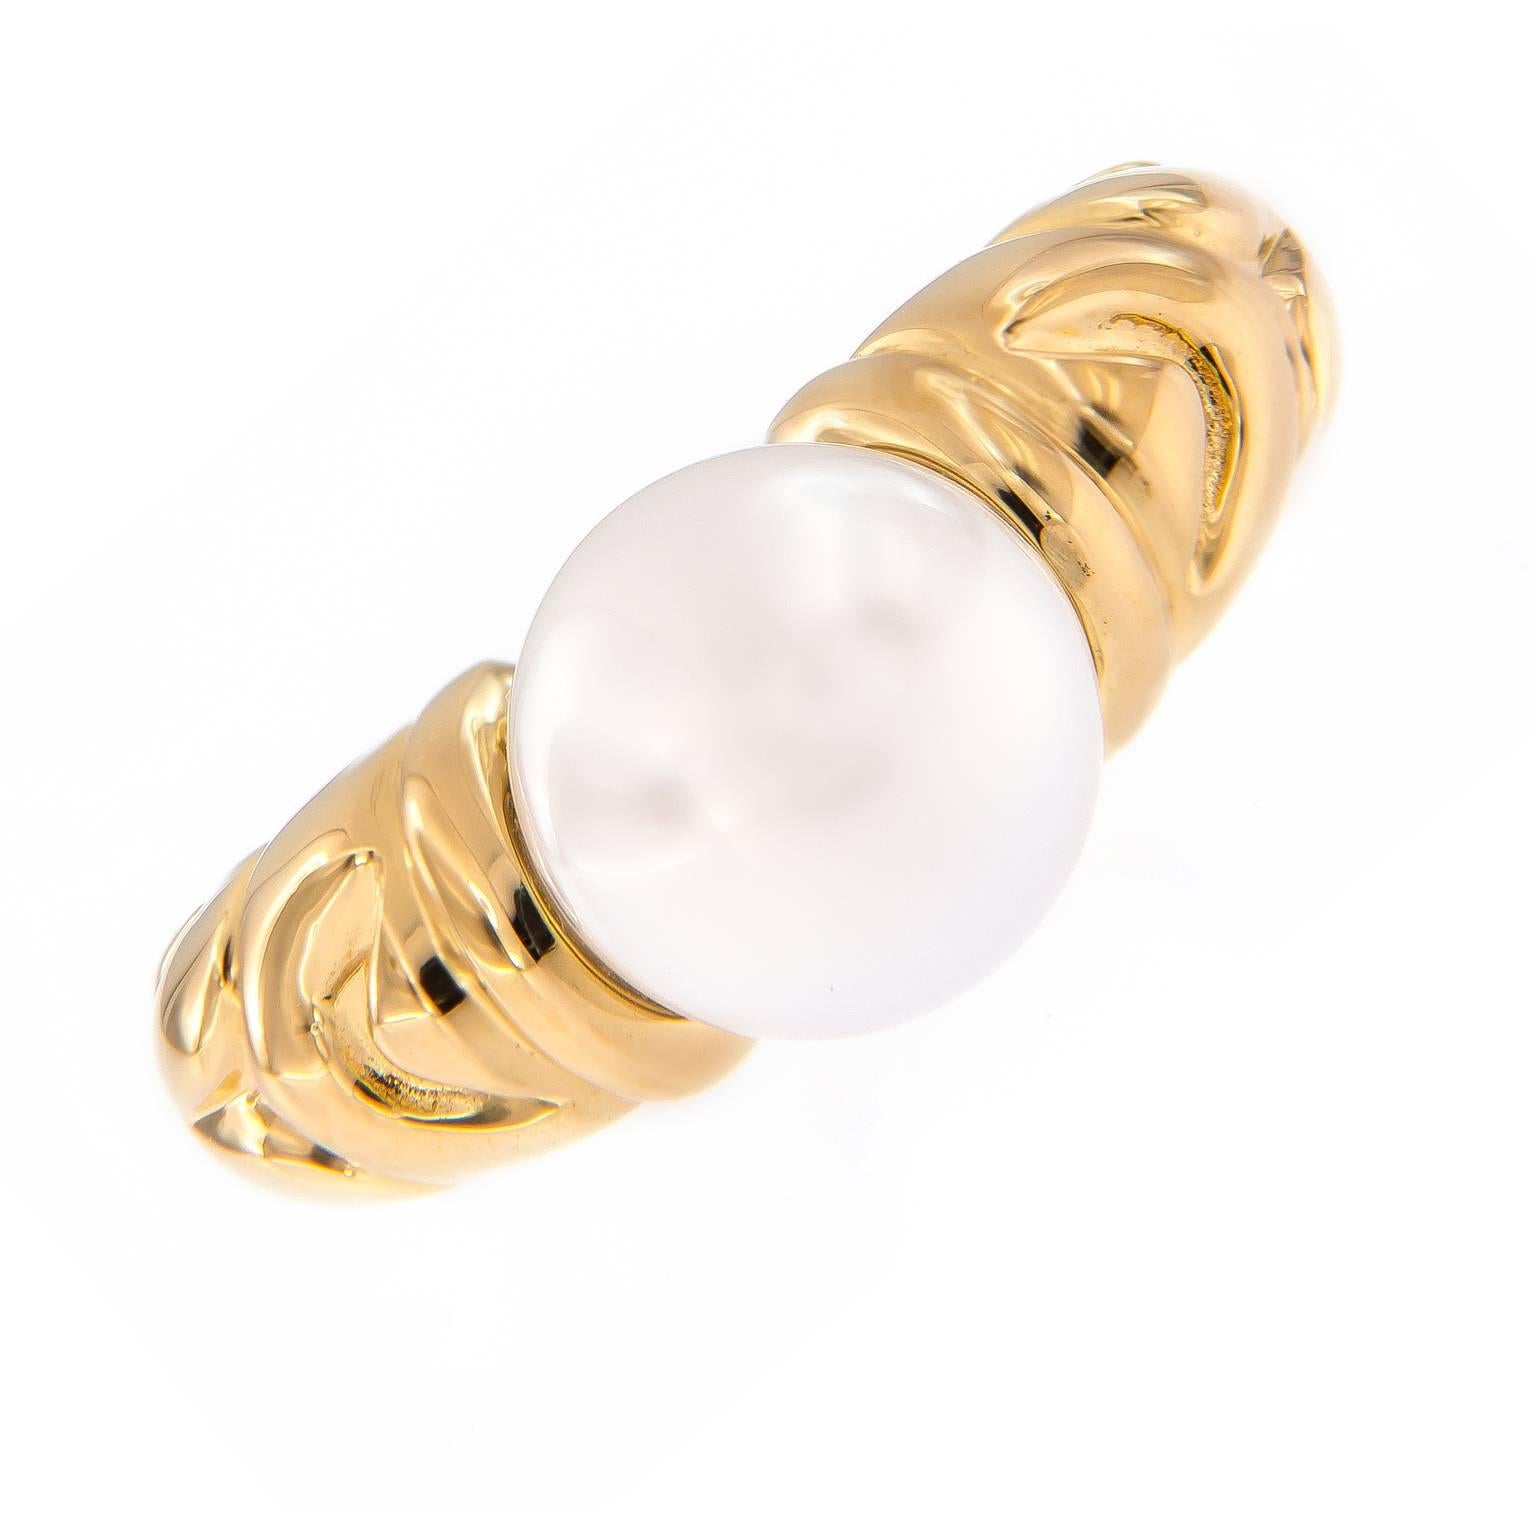 Bulgari Passo Doppio 18k yellow gold and pearl ring centers around a 9.4 mm cultured pearl. Ring Size 5.5

Marked: Bvlgari